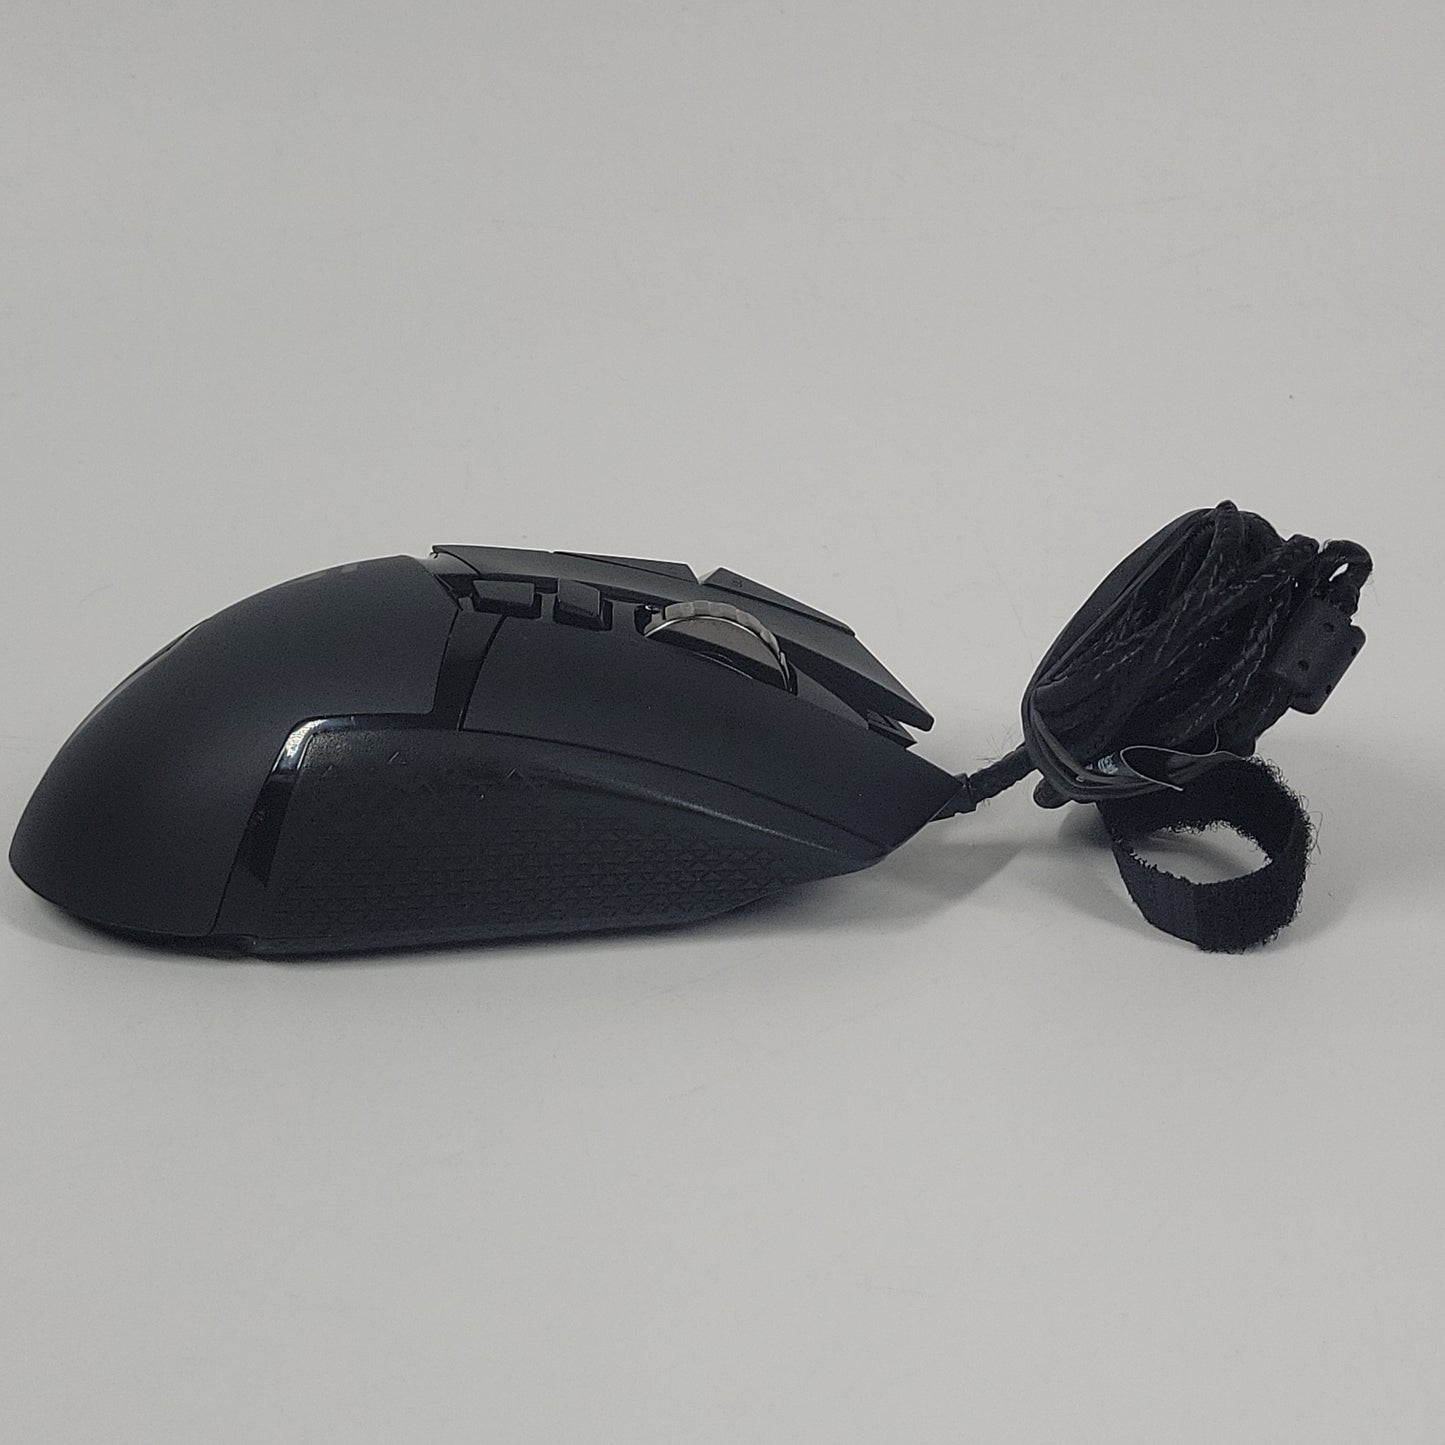 Logitech G502 Proteus Spectrum Wired Gaming Mouse 810-004868